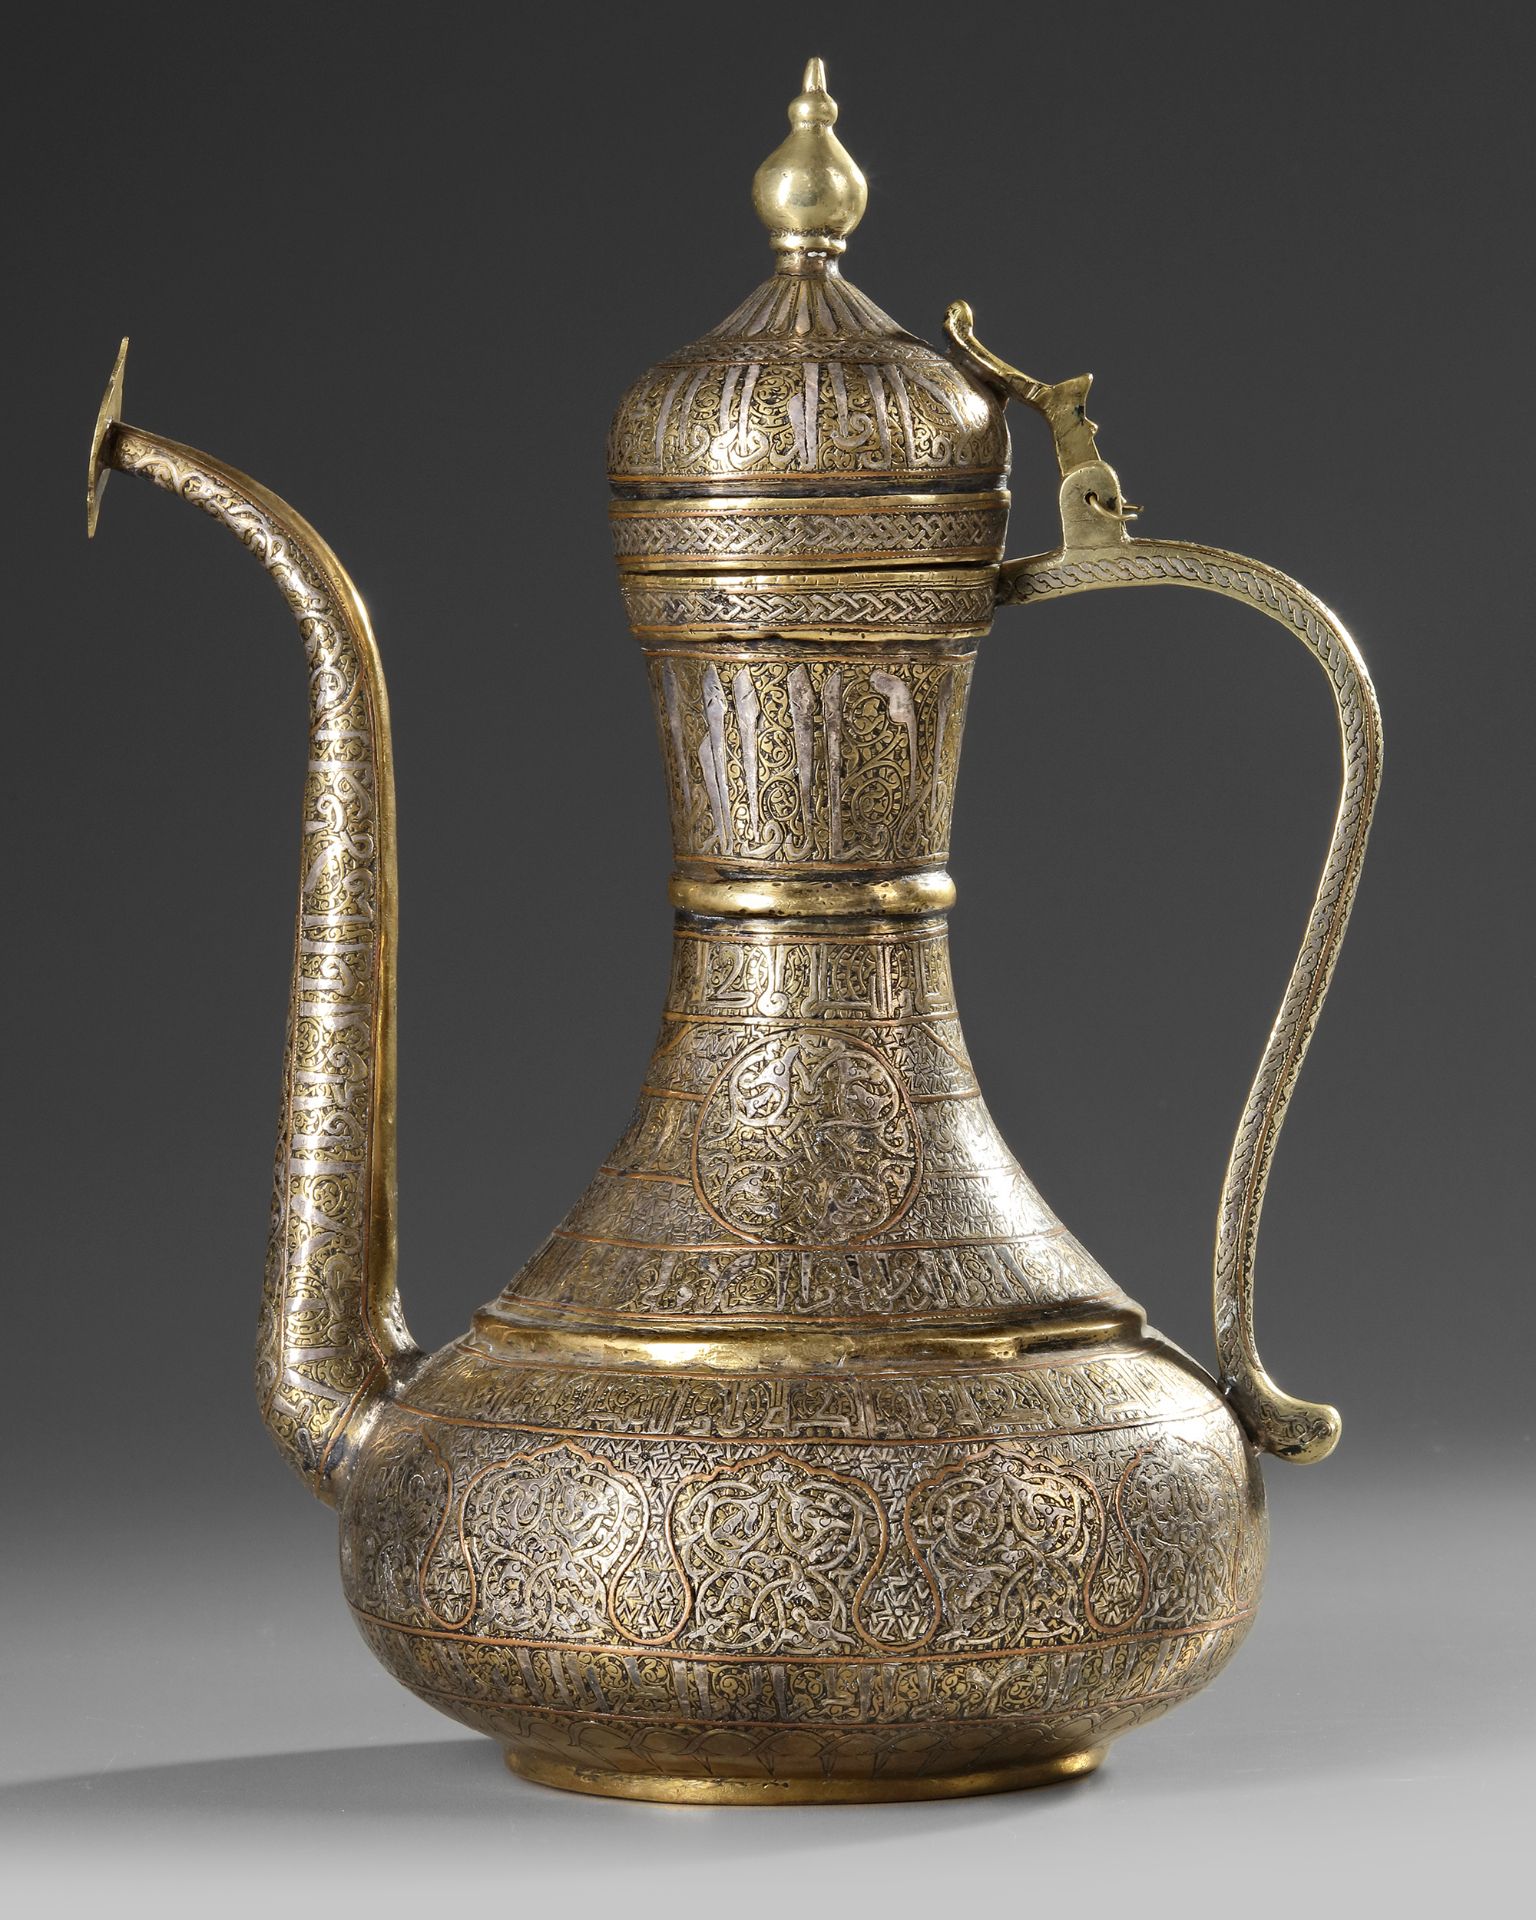 A FINE MAMLUK REVIVAL SILVER AND COPPER INLAID BRASS EWER, 19TH CENTURY